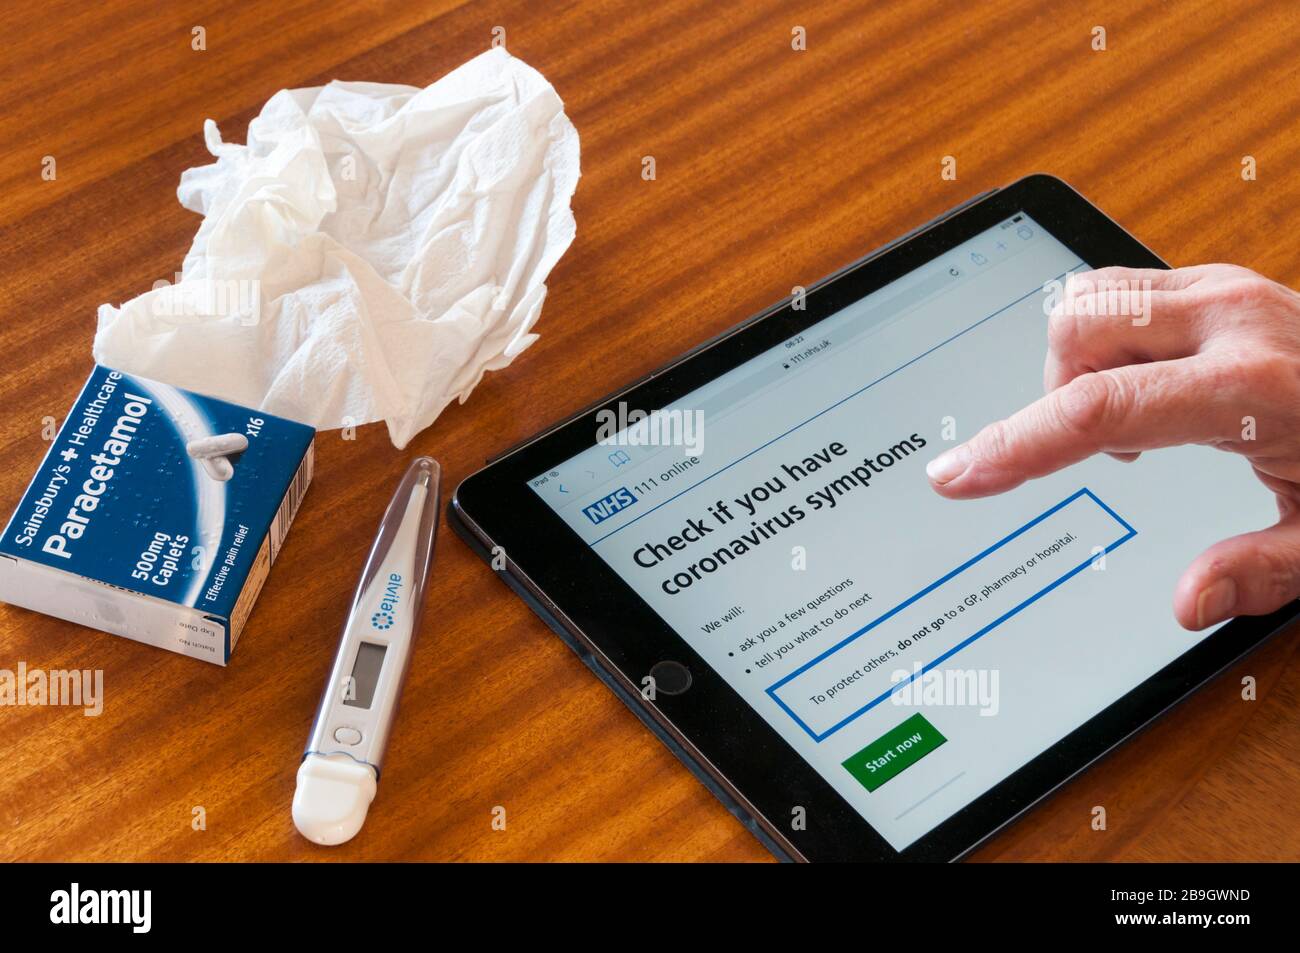 A woman using an ipad to check the NHS website for advice about Covid-19 Coronavirus symptons. With paracetamol, tissue and thermometer. Stock Photo